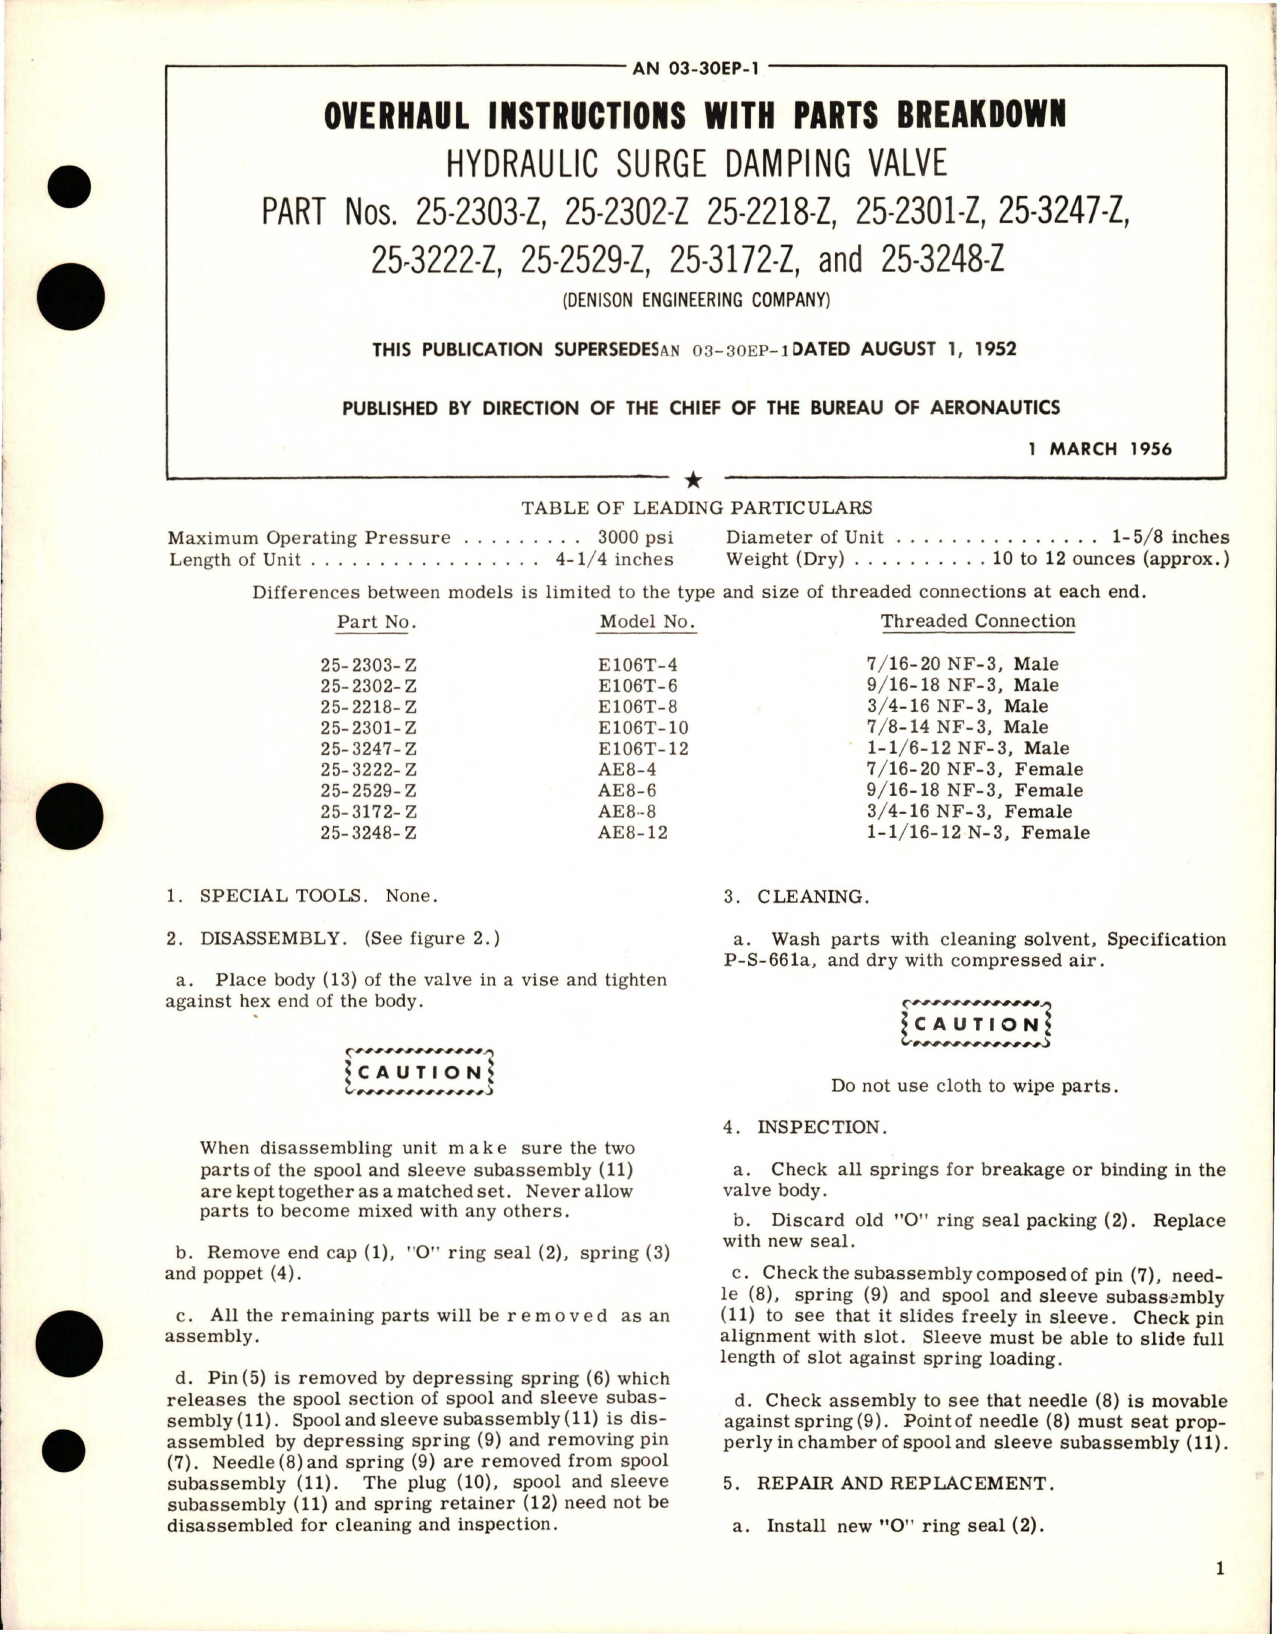 Sample page 1 from AirCorps Library document: Overhaul Instructions with Parts Breakdown for Hydraulic Surge Damping Valve